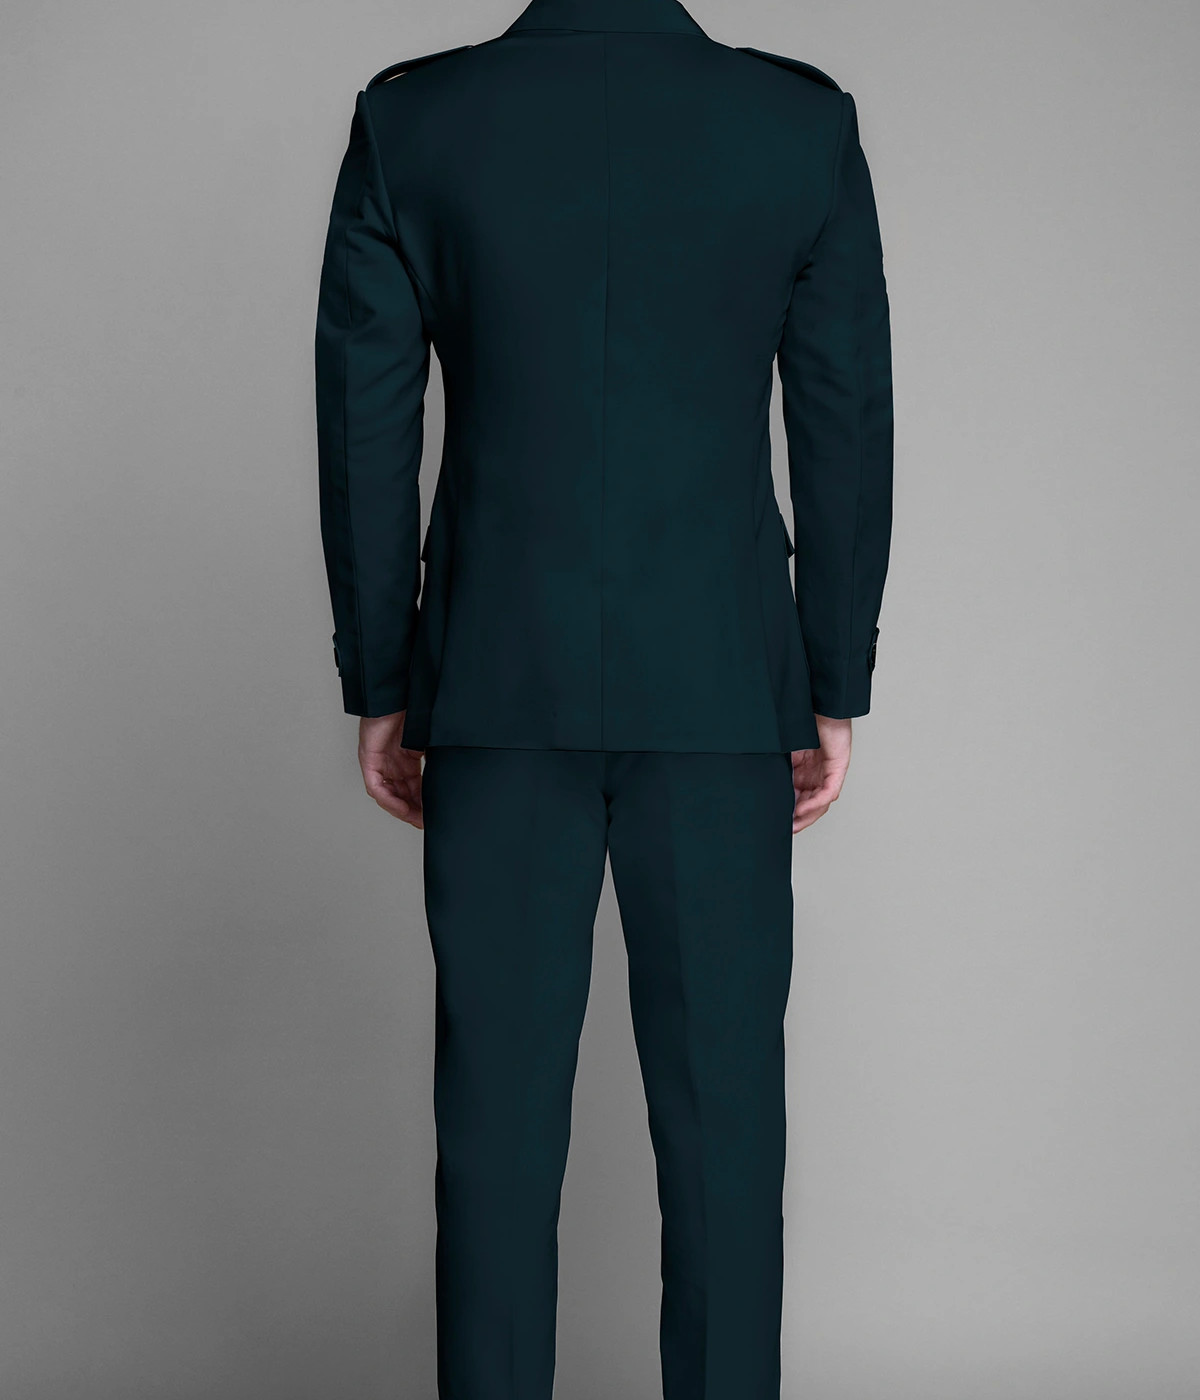 Aspen Teal Green Leisure Suit- view-1